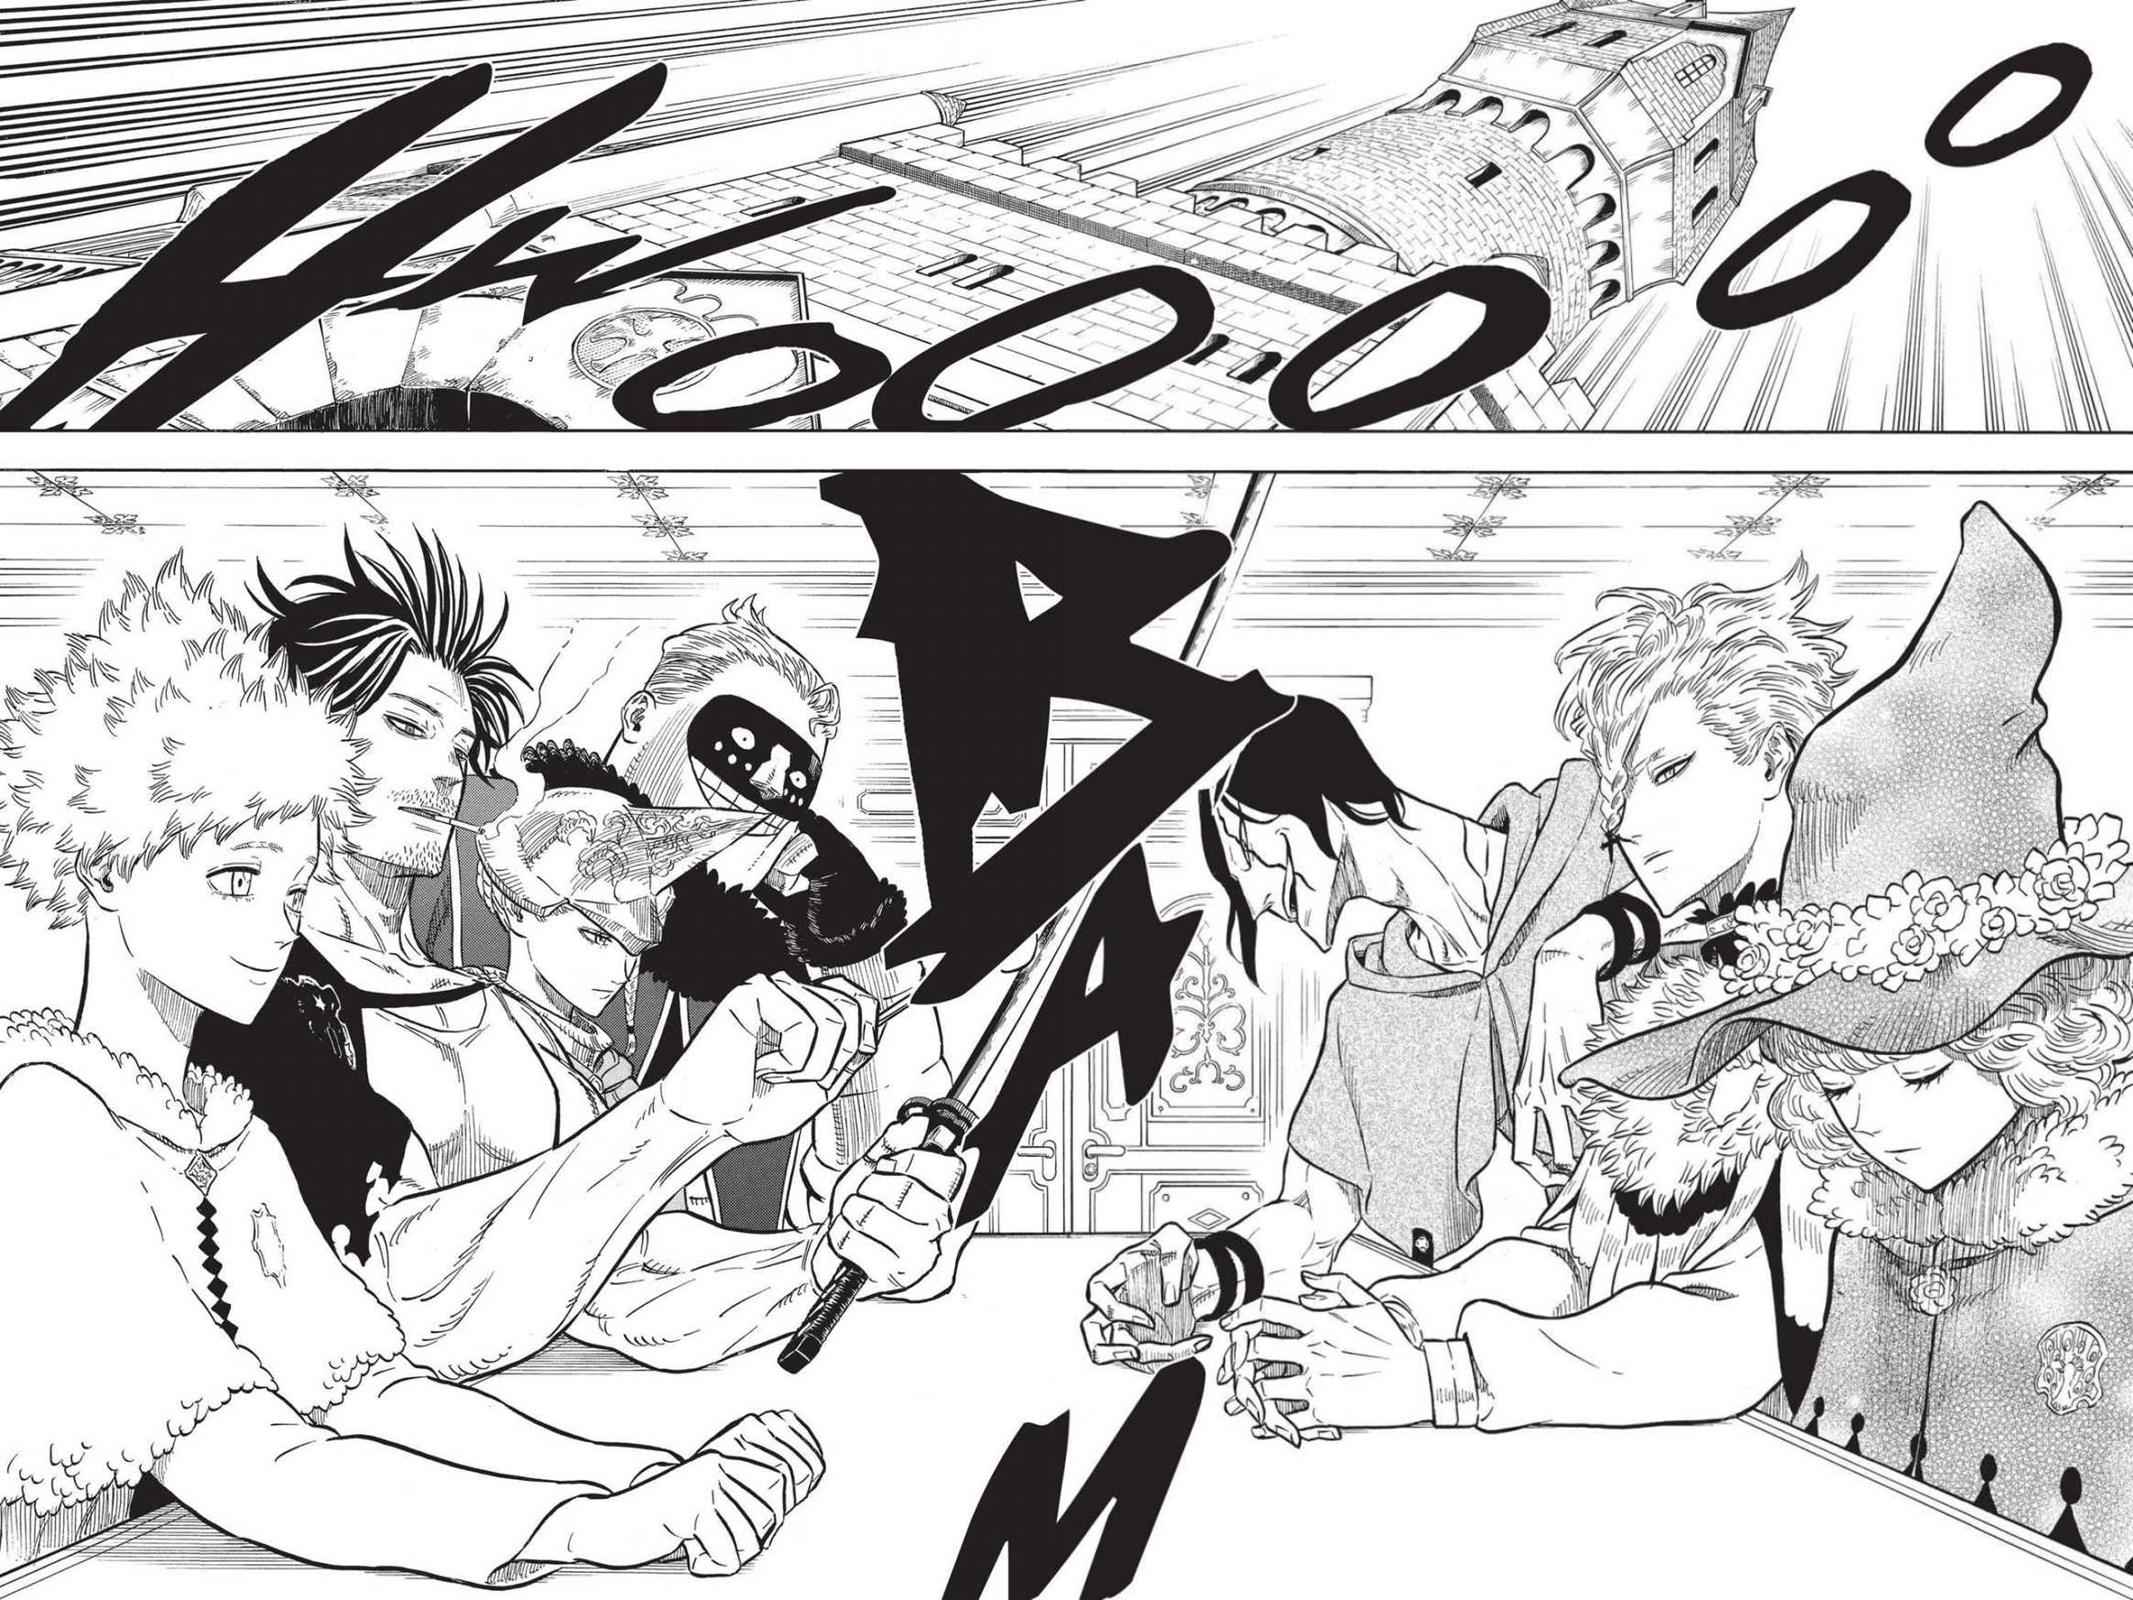 You are reading Black Clover manga chapter 054 in English. 